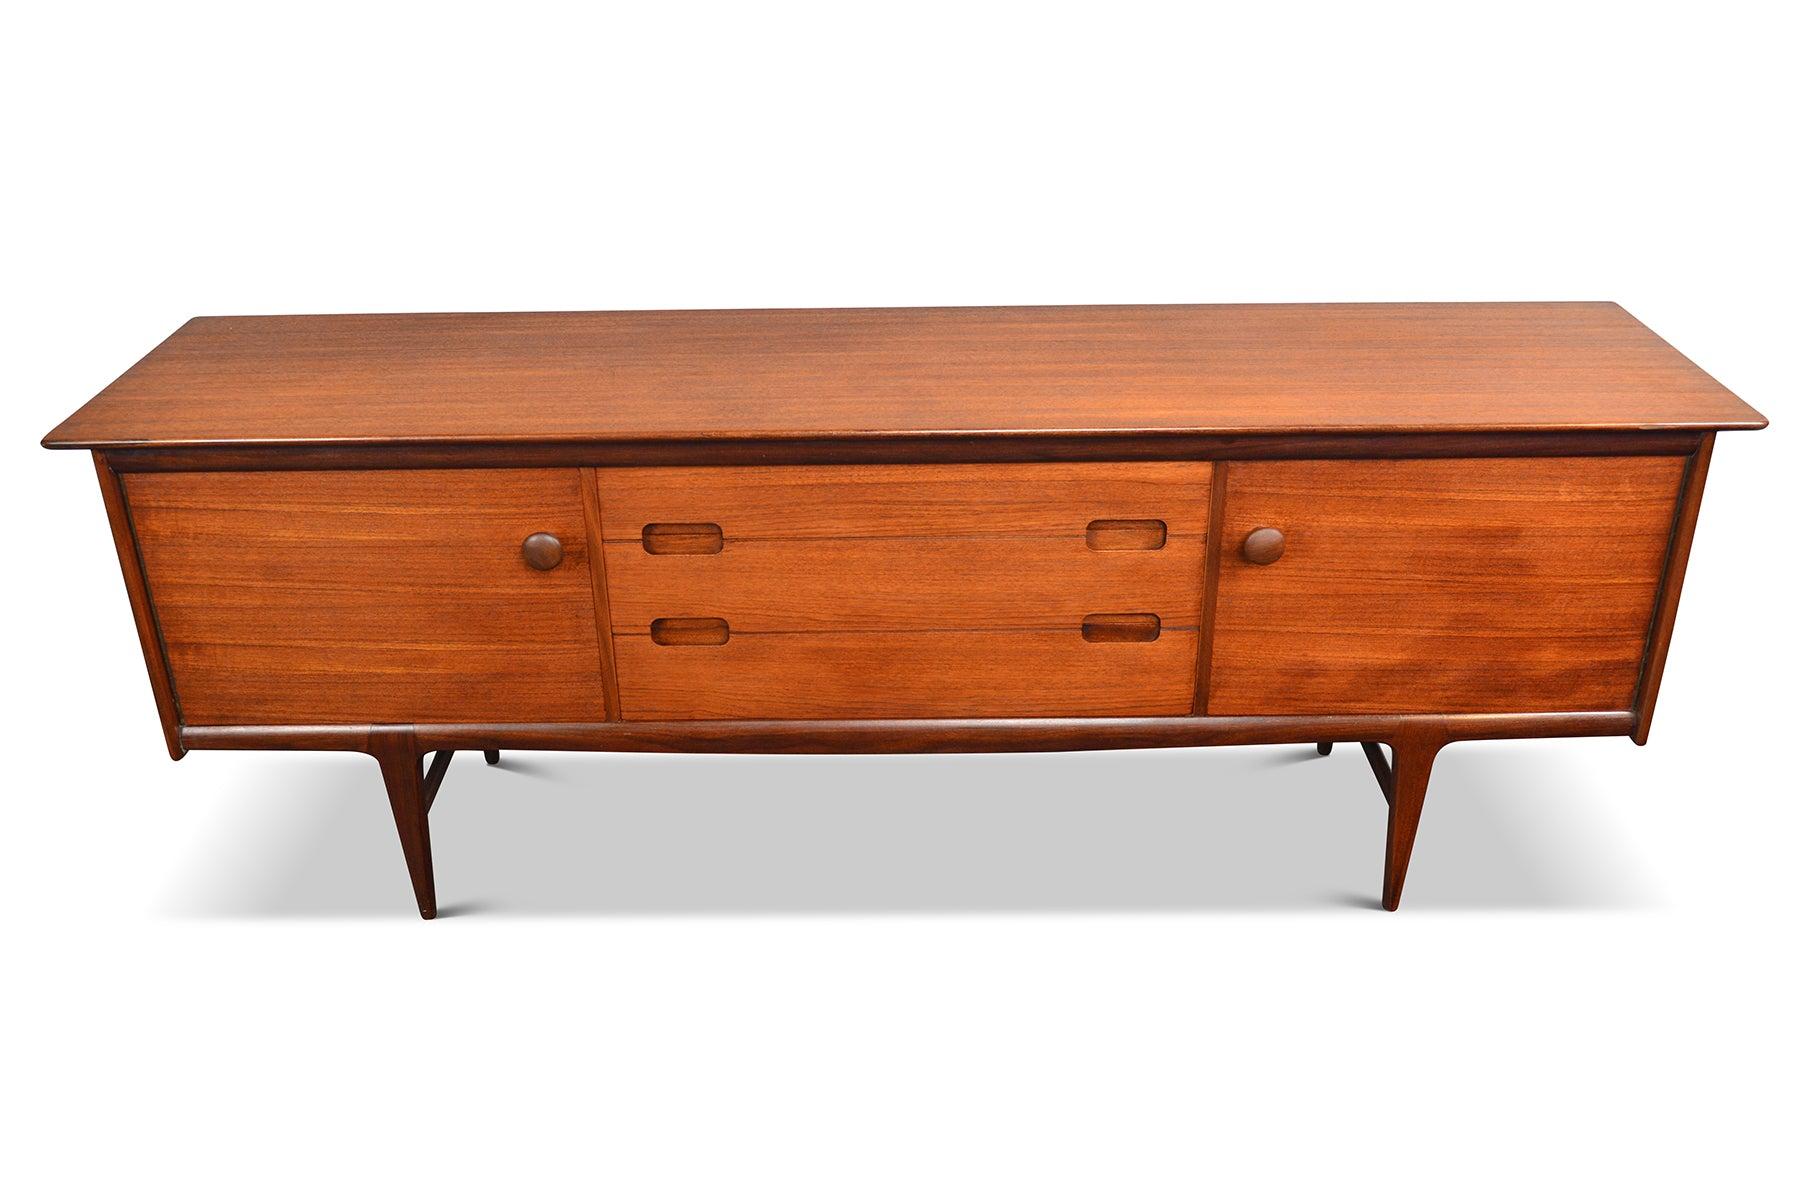 Large Teak Credenza by a. Younger Ltd #2 3